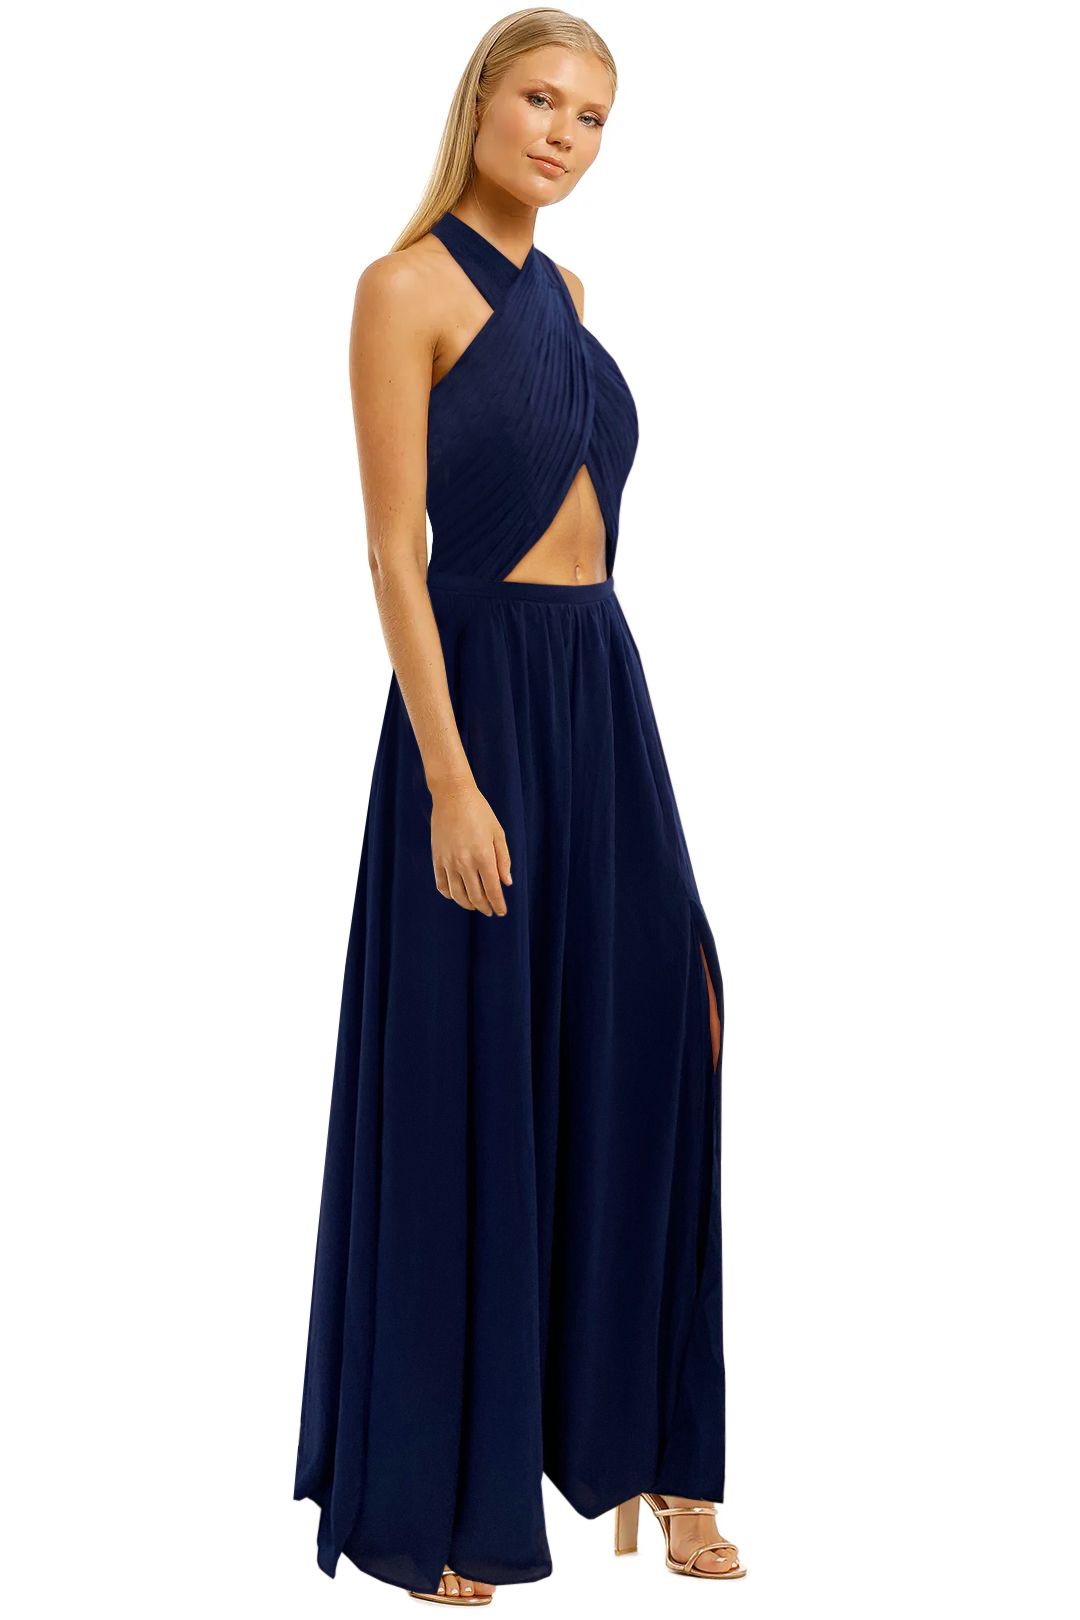 Fame-and-Partners-Wired-Heart-Navy-Maxi-Dress-Front